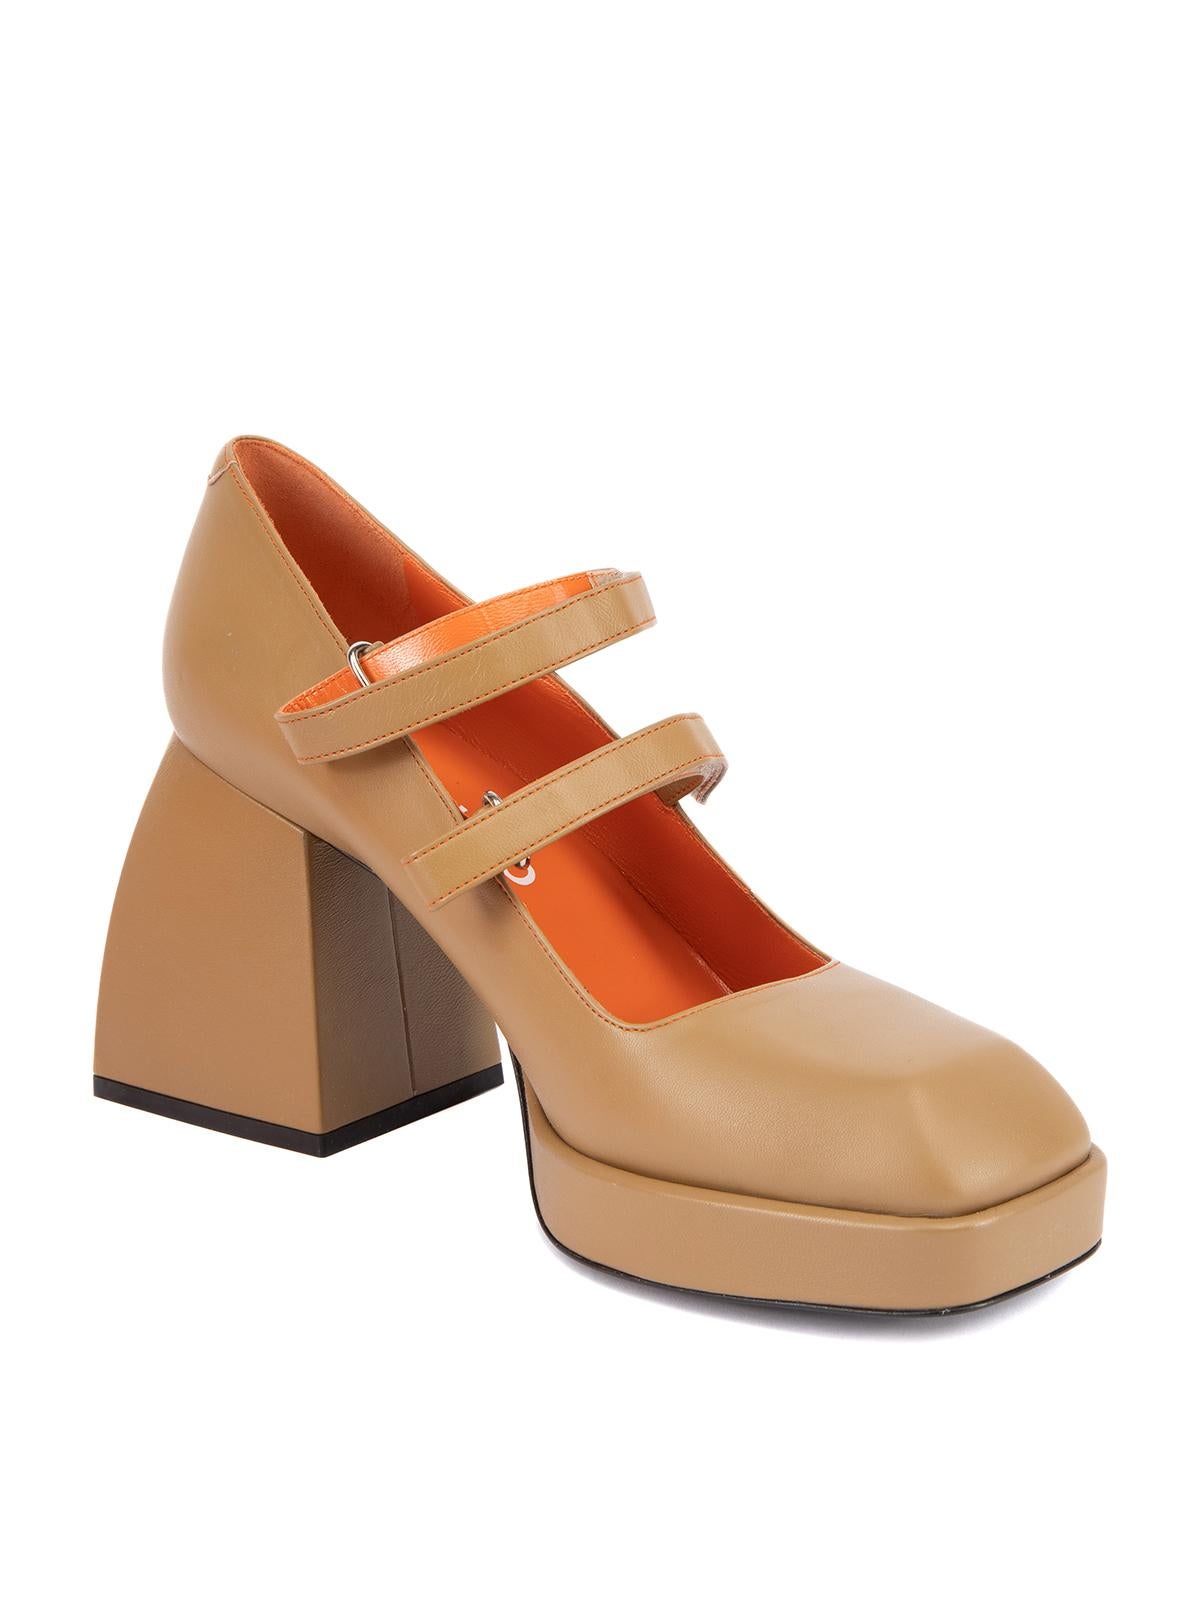 CONDITION is Never Worn, with tag. No visible wear to heels is evident on this brand new Nodaleto designer resale item. This item comes with the original dustbag and shoe box. Details Tan Leather Pumps Bulla Babies Platform Square toe Two leather